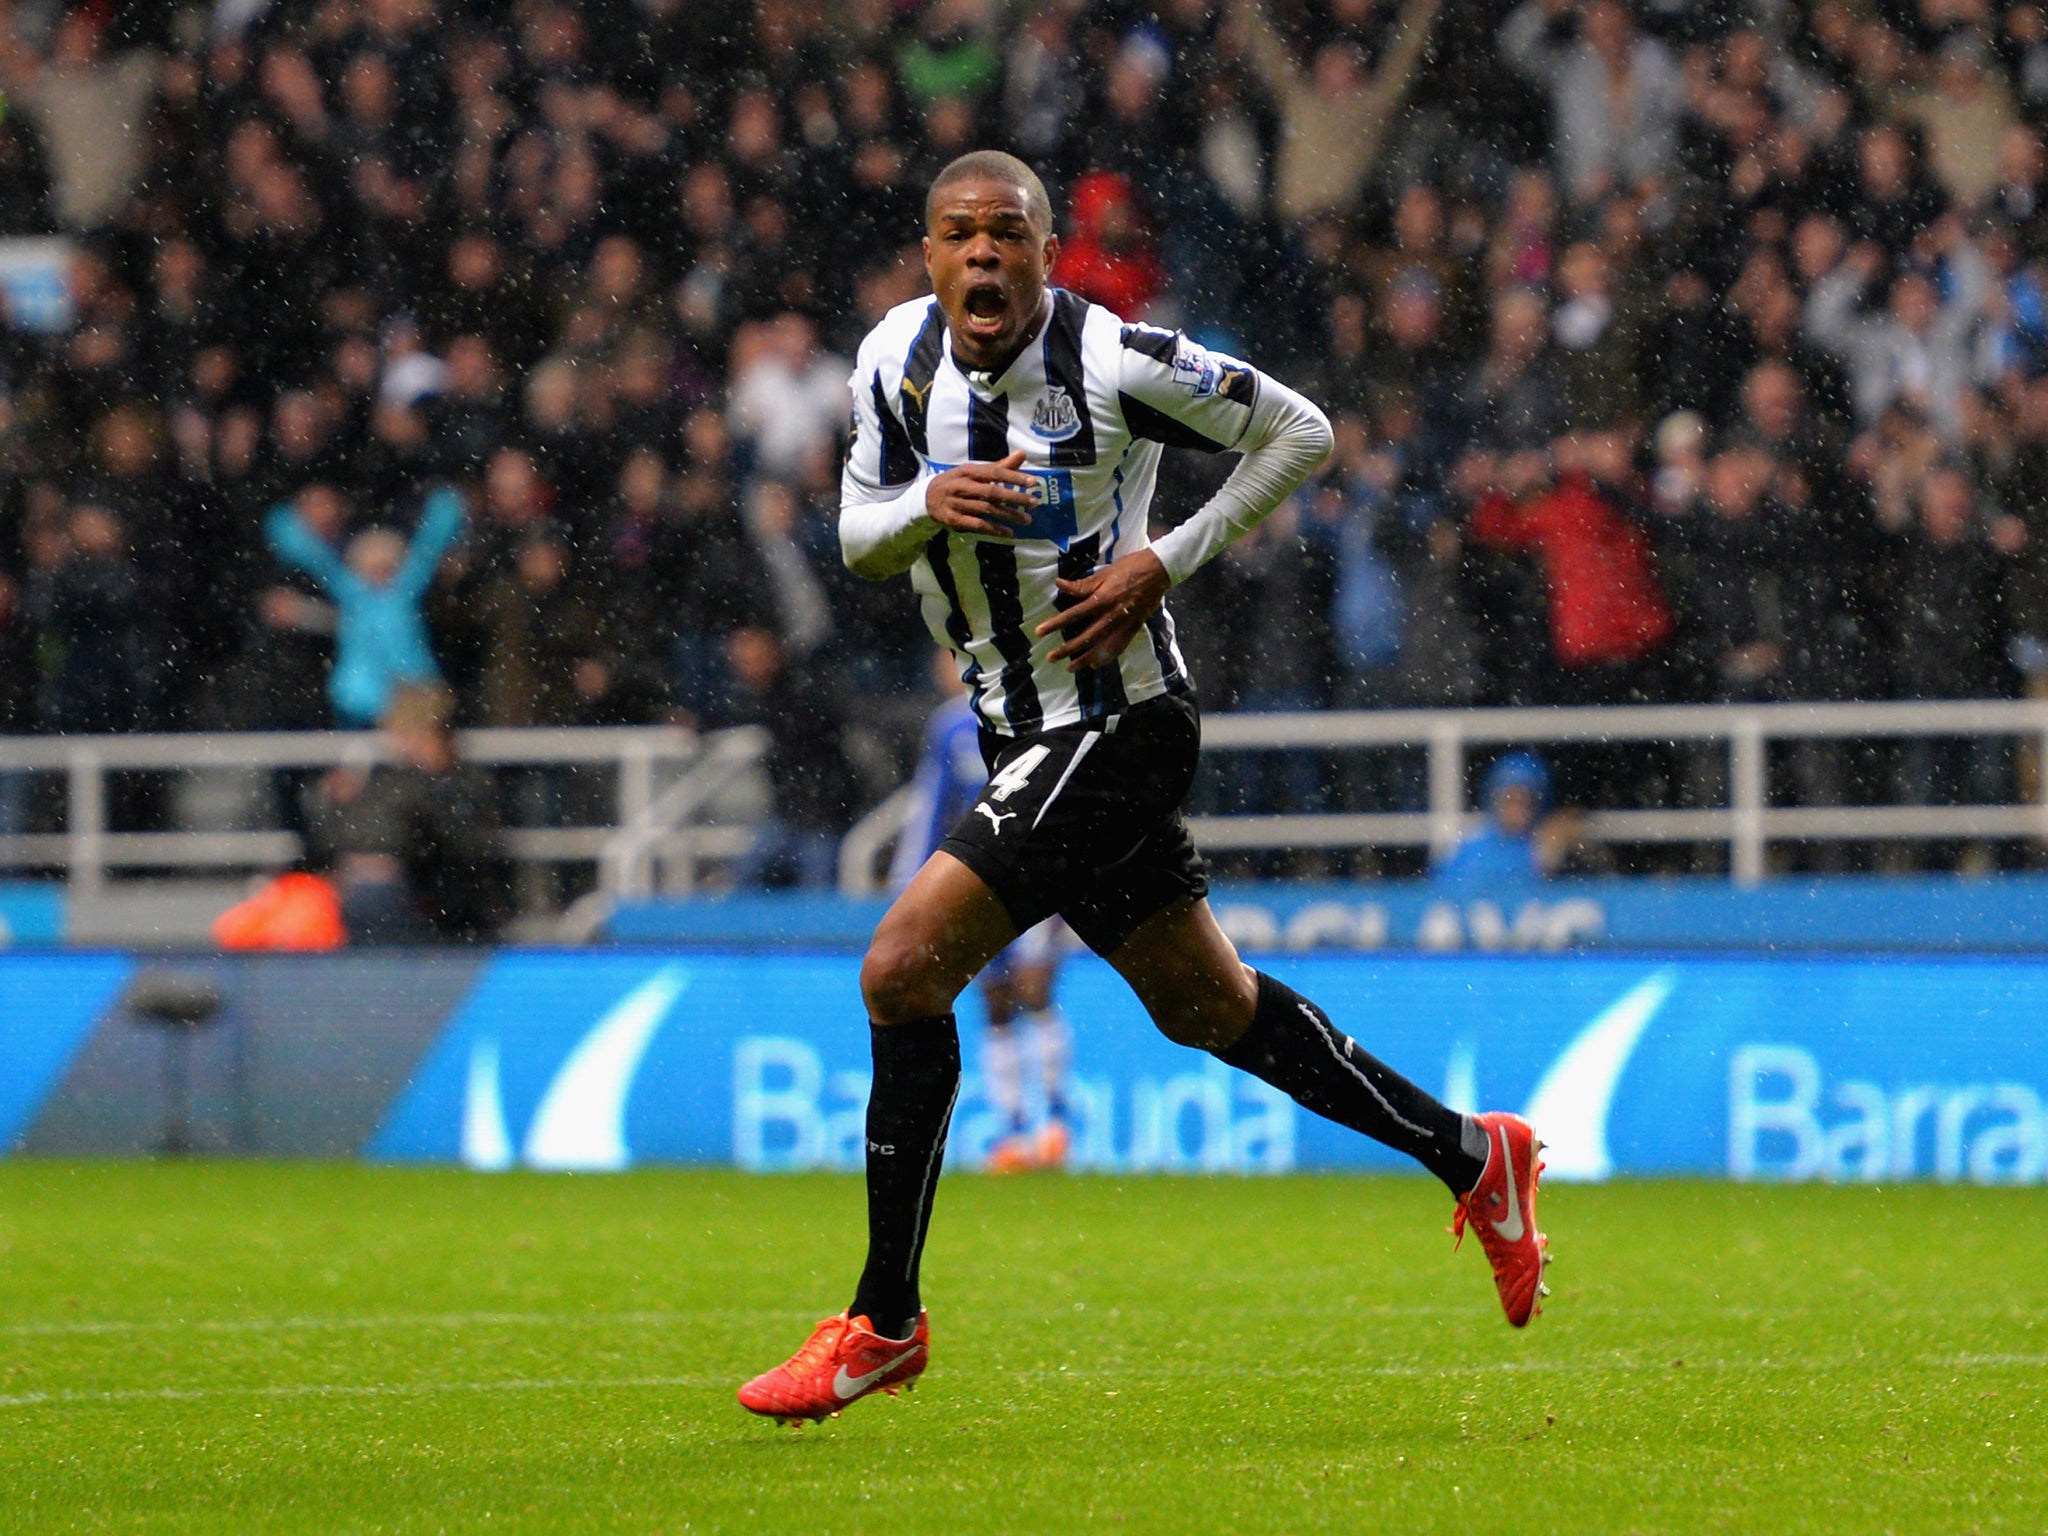 Loic Remy is hoping for celebrations against Tottenham